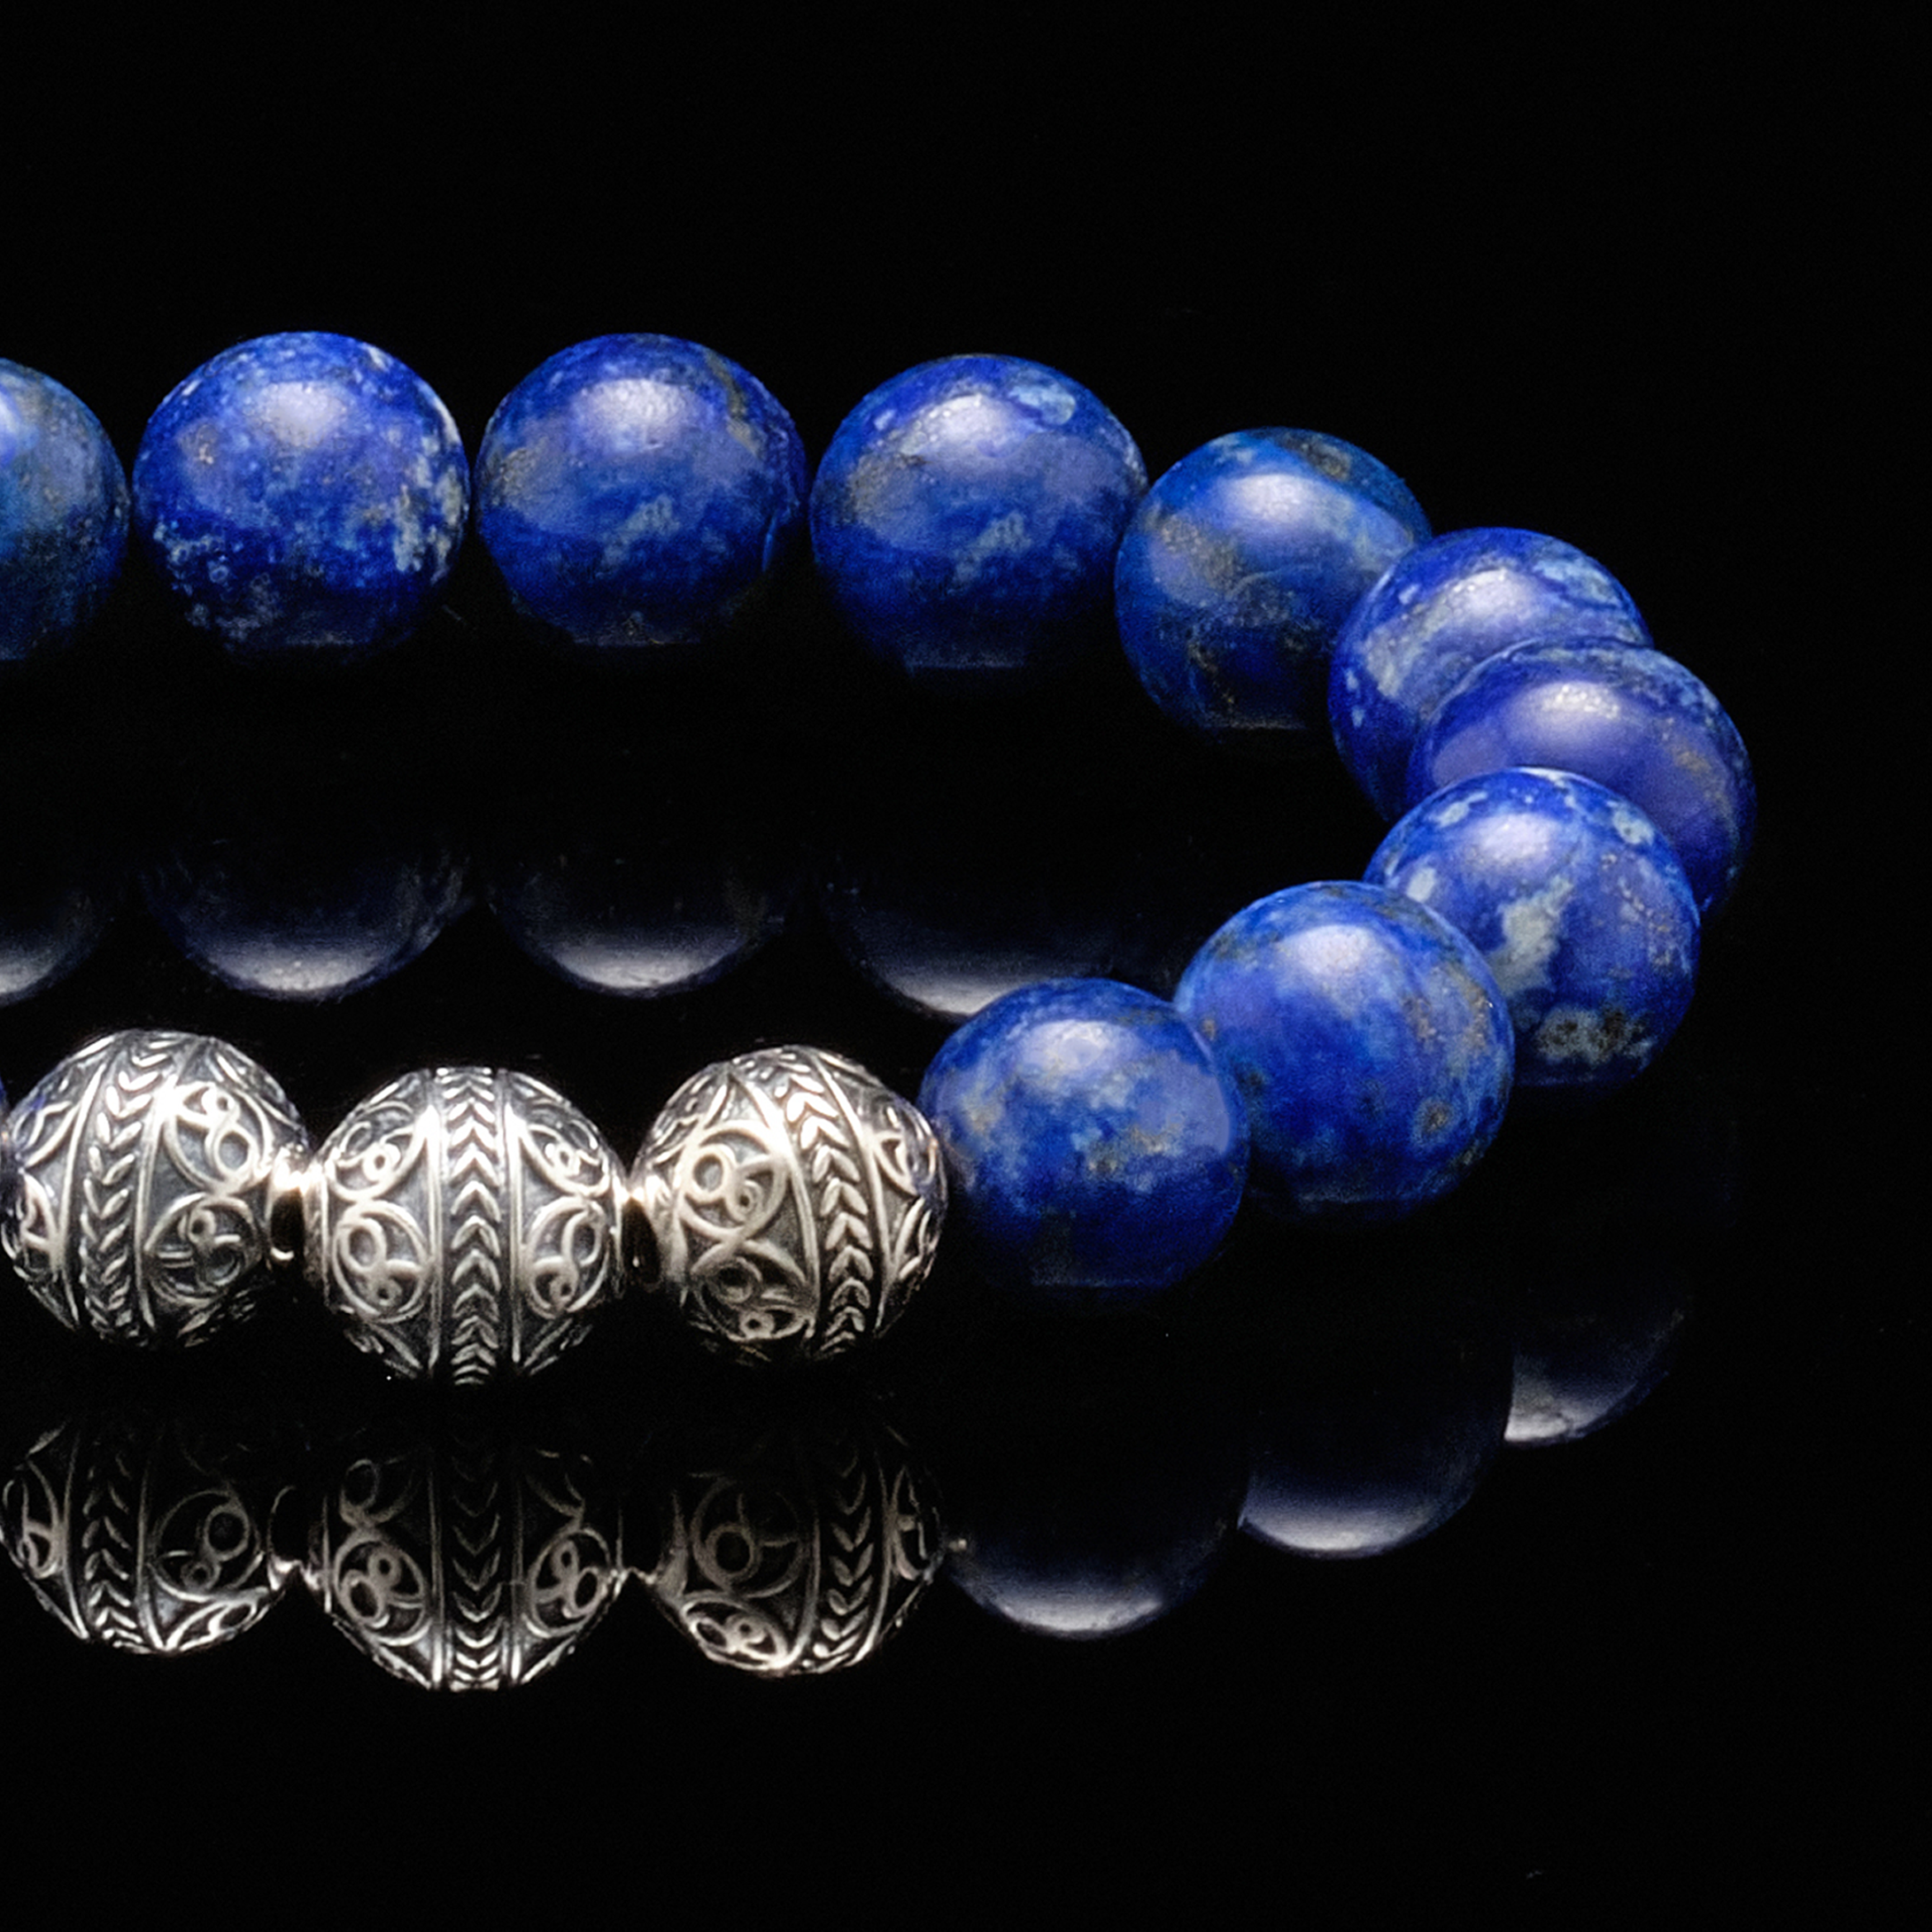 Often to attract the kind of prosperity we crave in our lives, we need to let go and go against the tide. This men's beaded bracelet will make you feel comfortable enough to do this. Made with beautiful Lapis Lazuli Stone, the famous ''Blue stone'', and 925 sterling silver beads